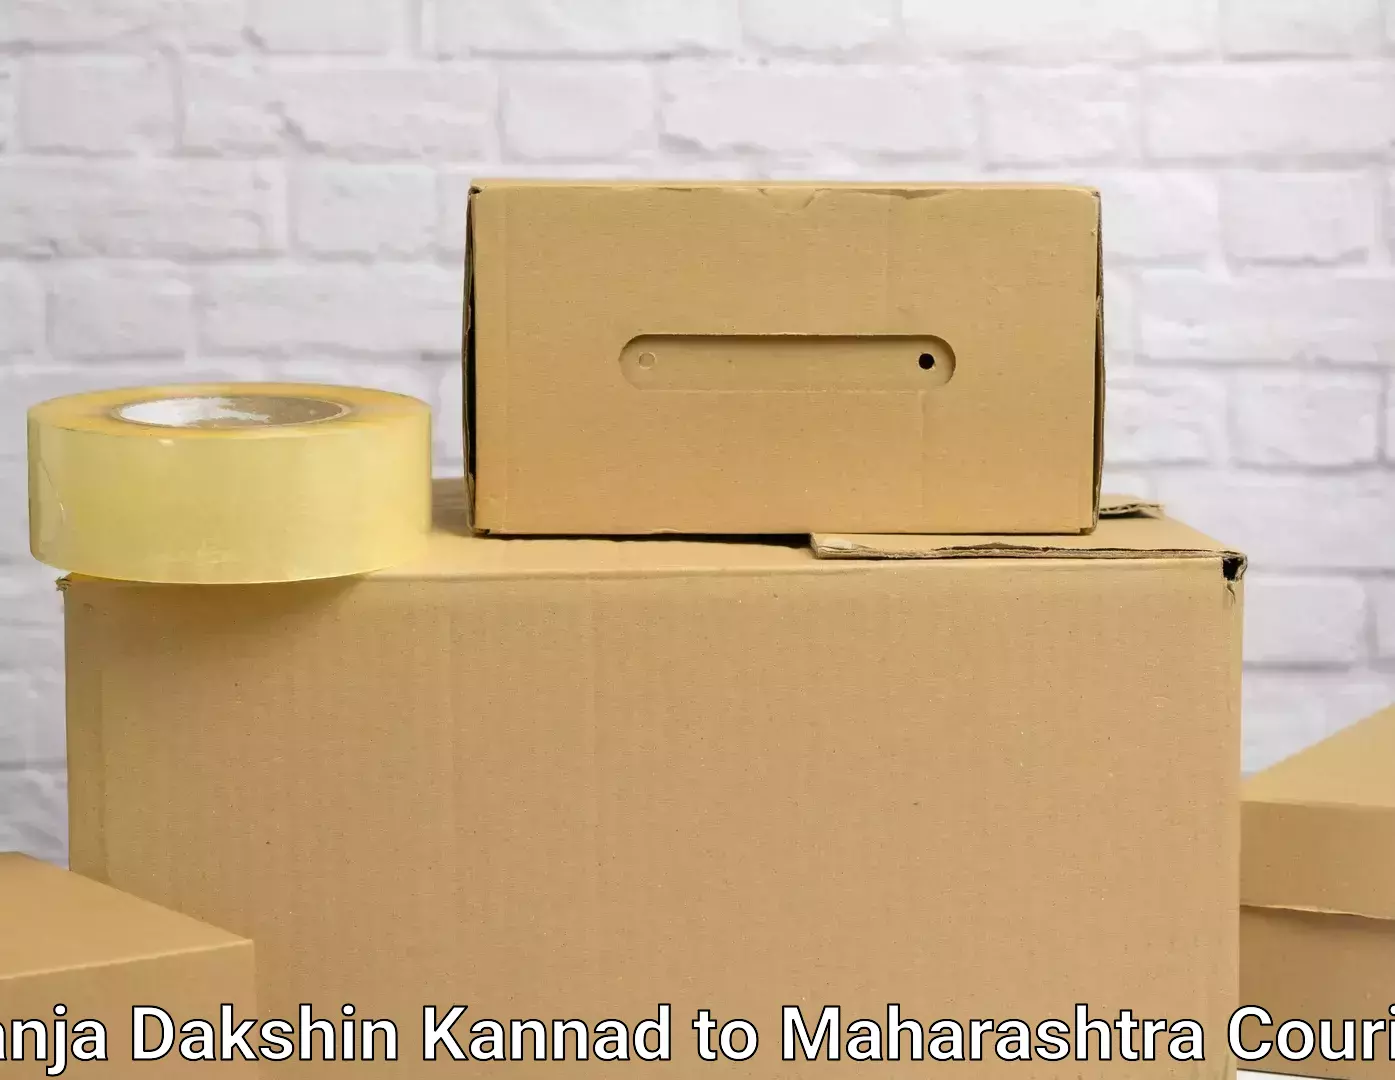 Quality relocation assistance Panja Dakshin Kannad to Dhule